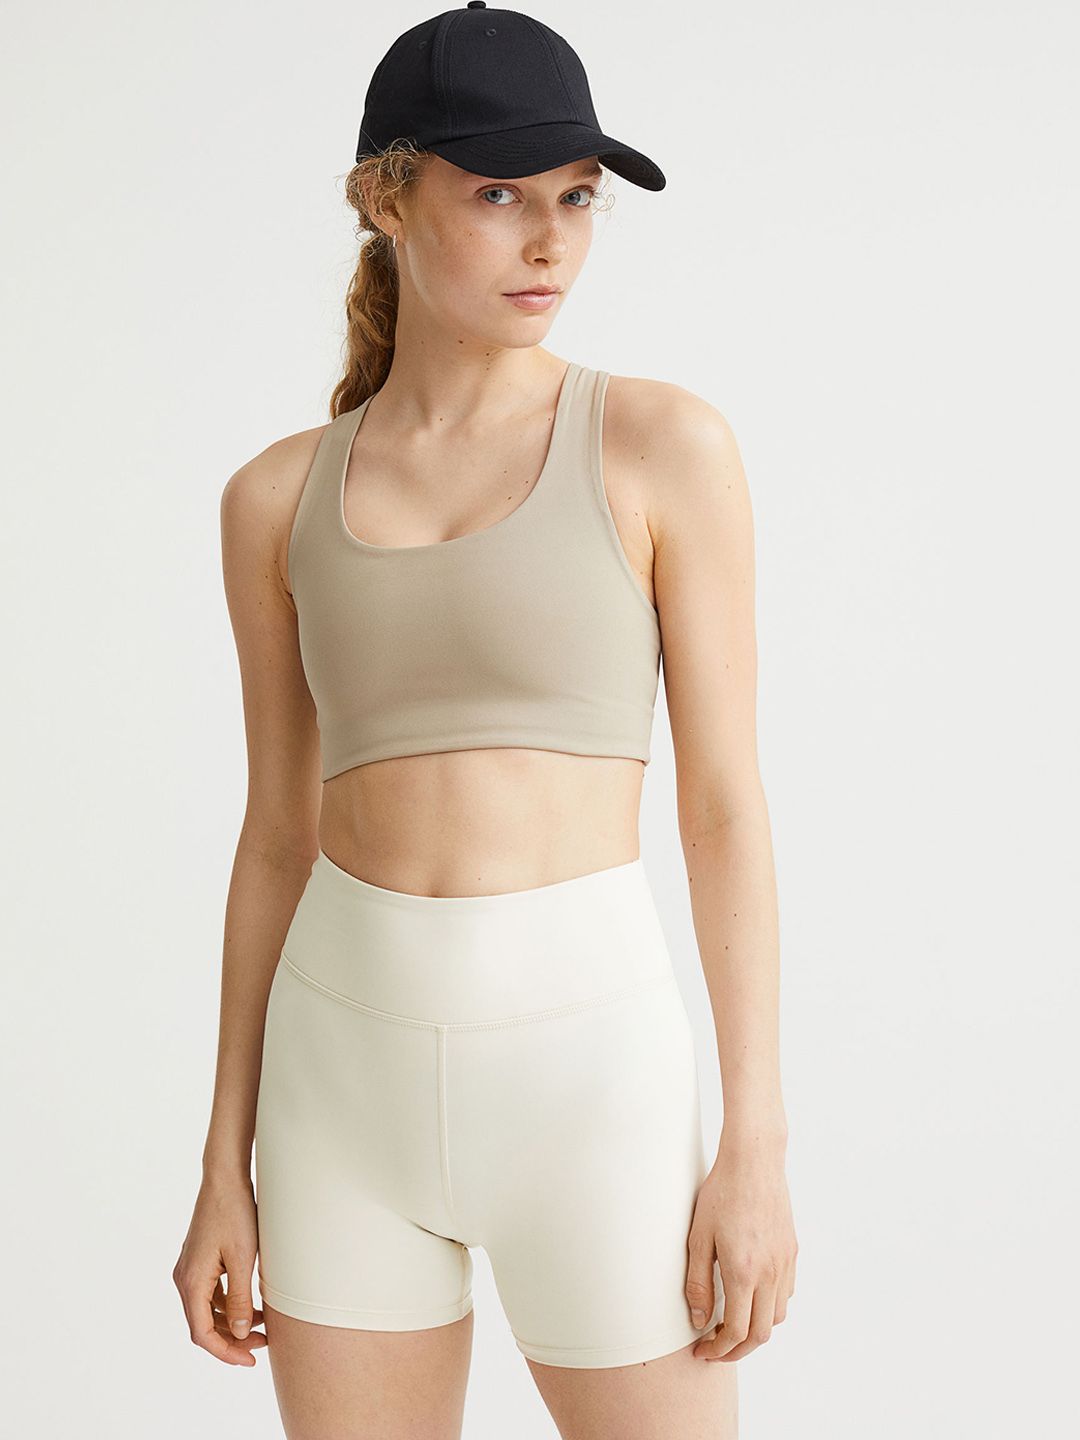 H&M Women Off-White High Waist Hotpants Price in India